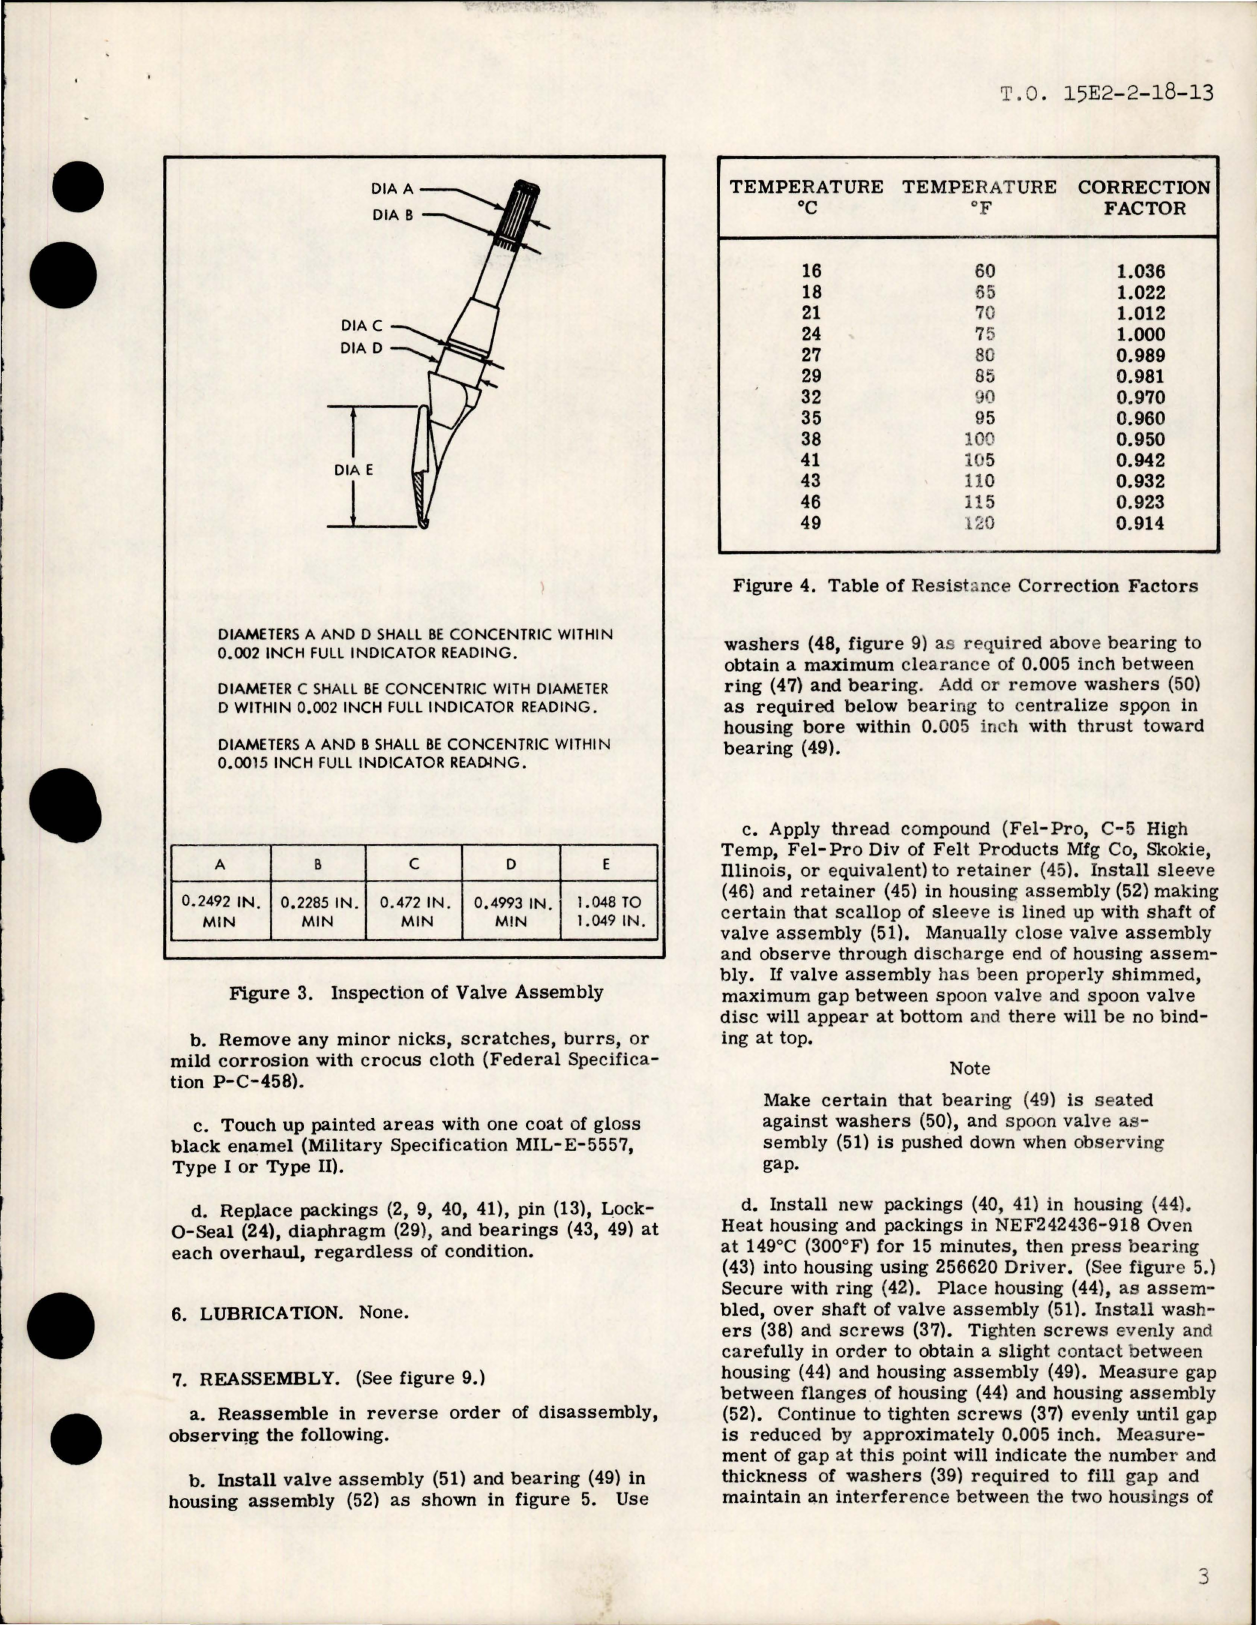 Sample page 5 from AirCorps Library document: Overhaul Instructions with Parts for Thermostat Controlled Shutoff Valve - Parts 106388, 106388-1-2, and 106388-3-1